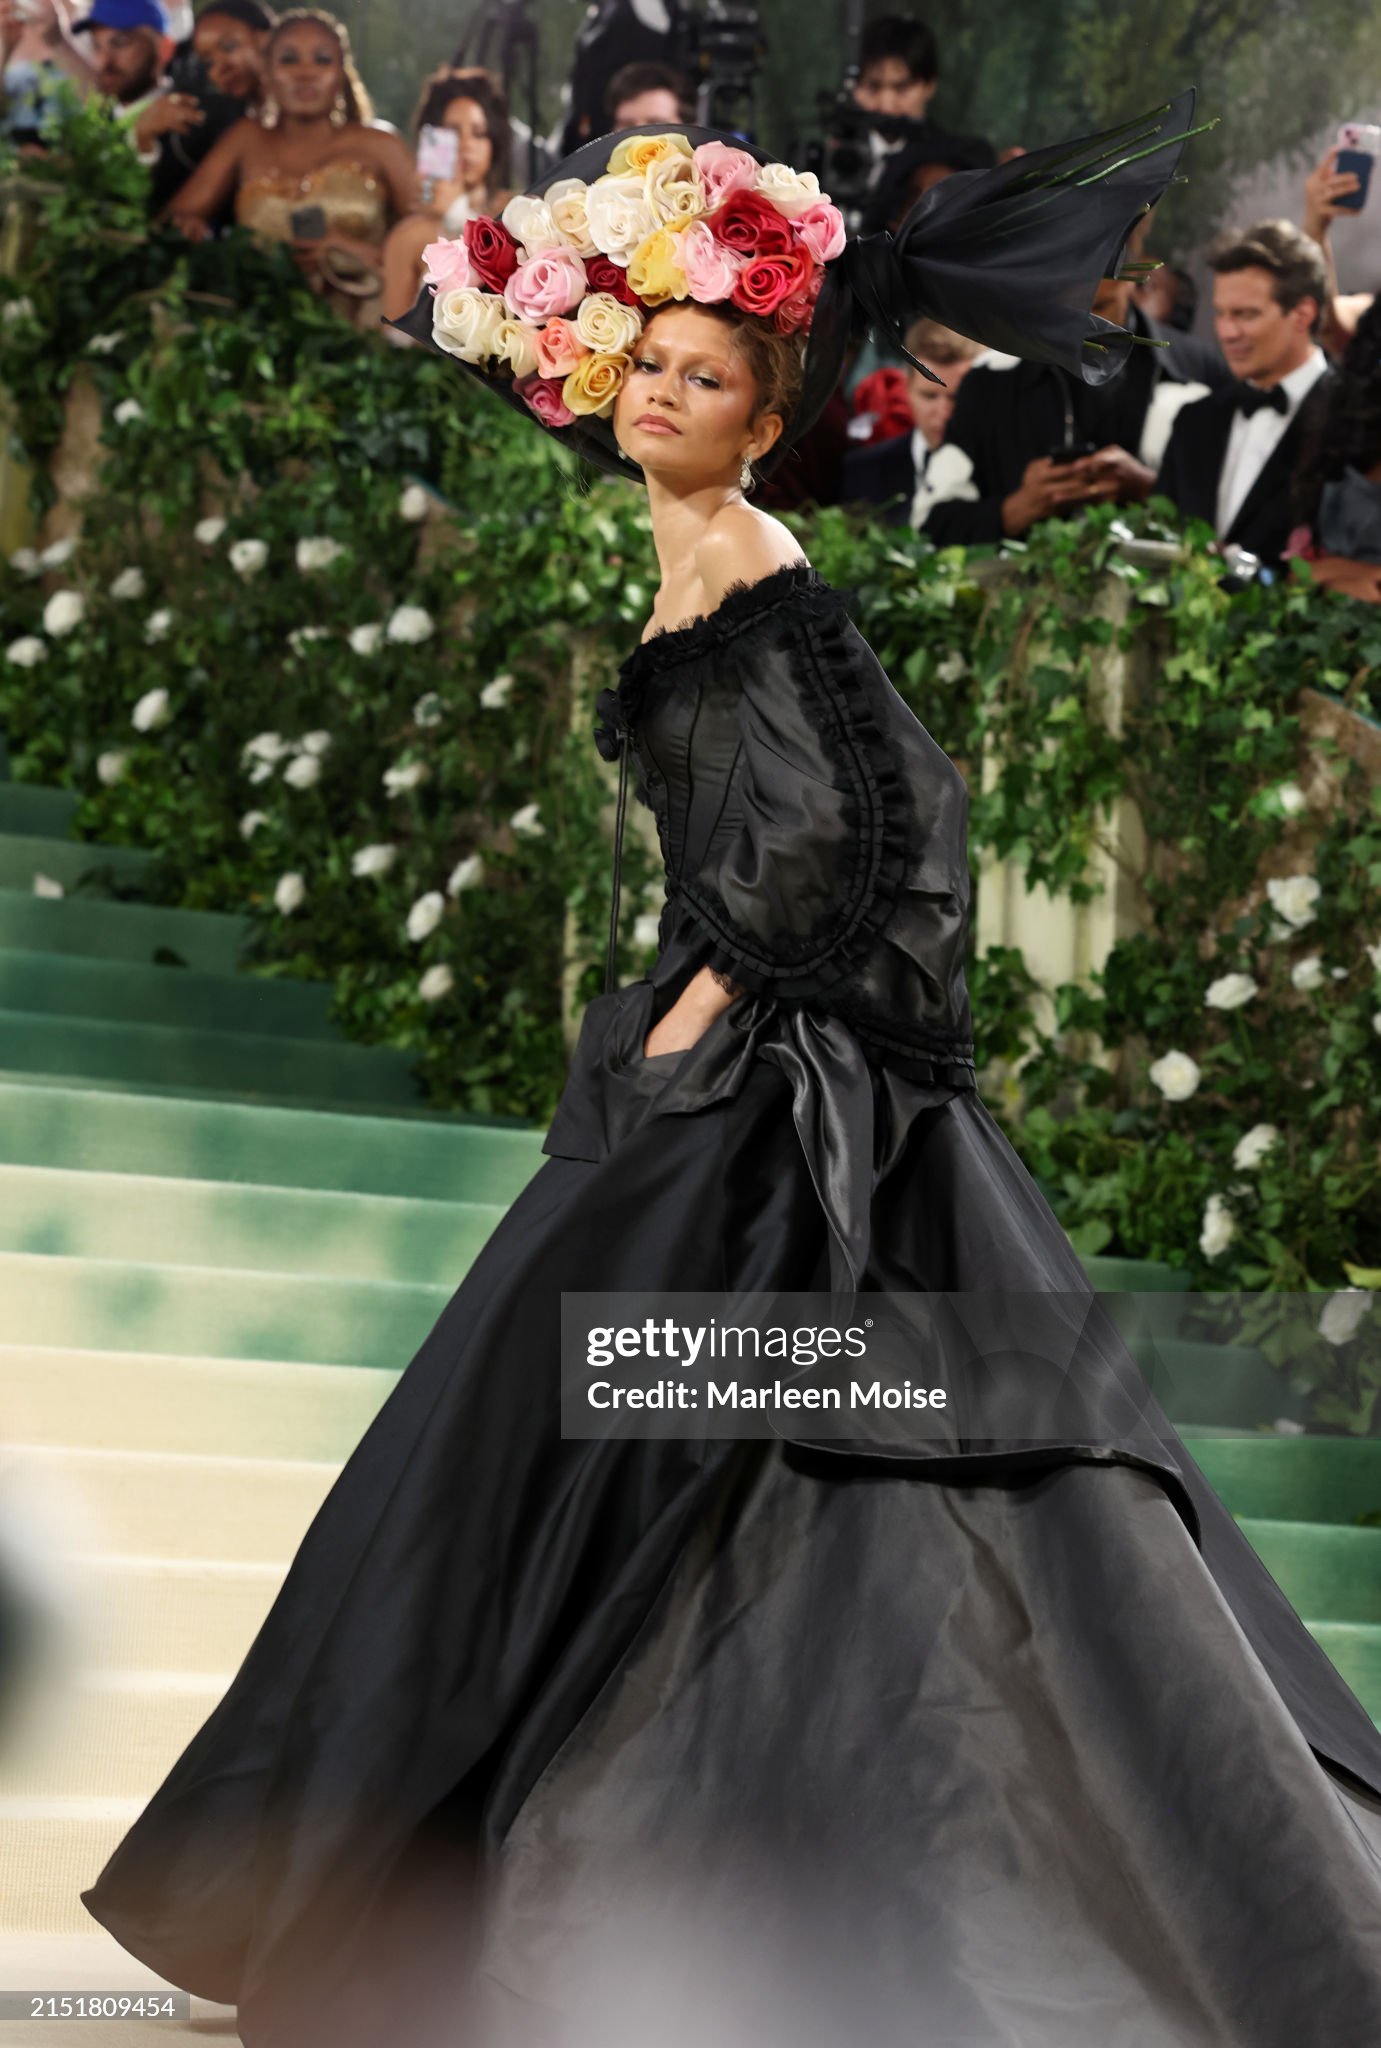 gettyimages-2151809454-2048x2048.jpg